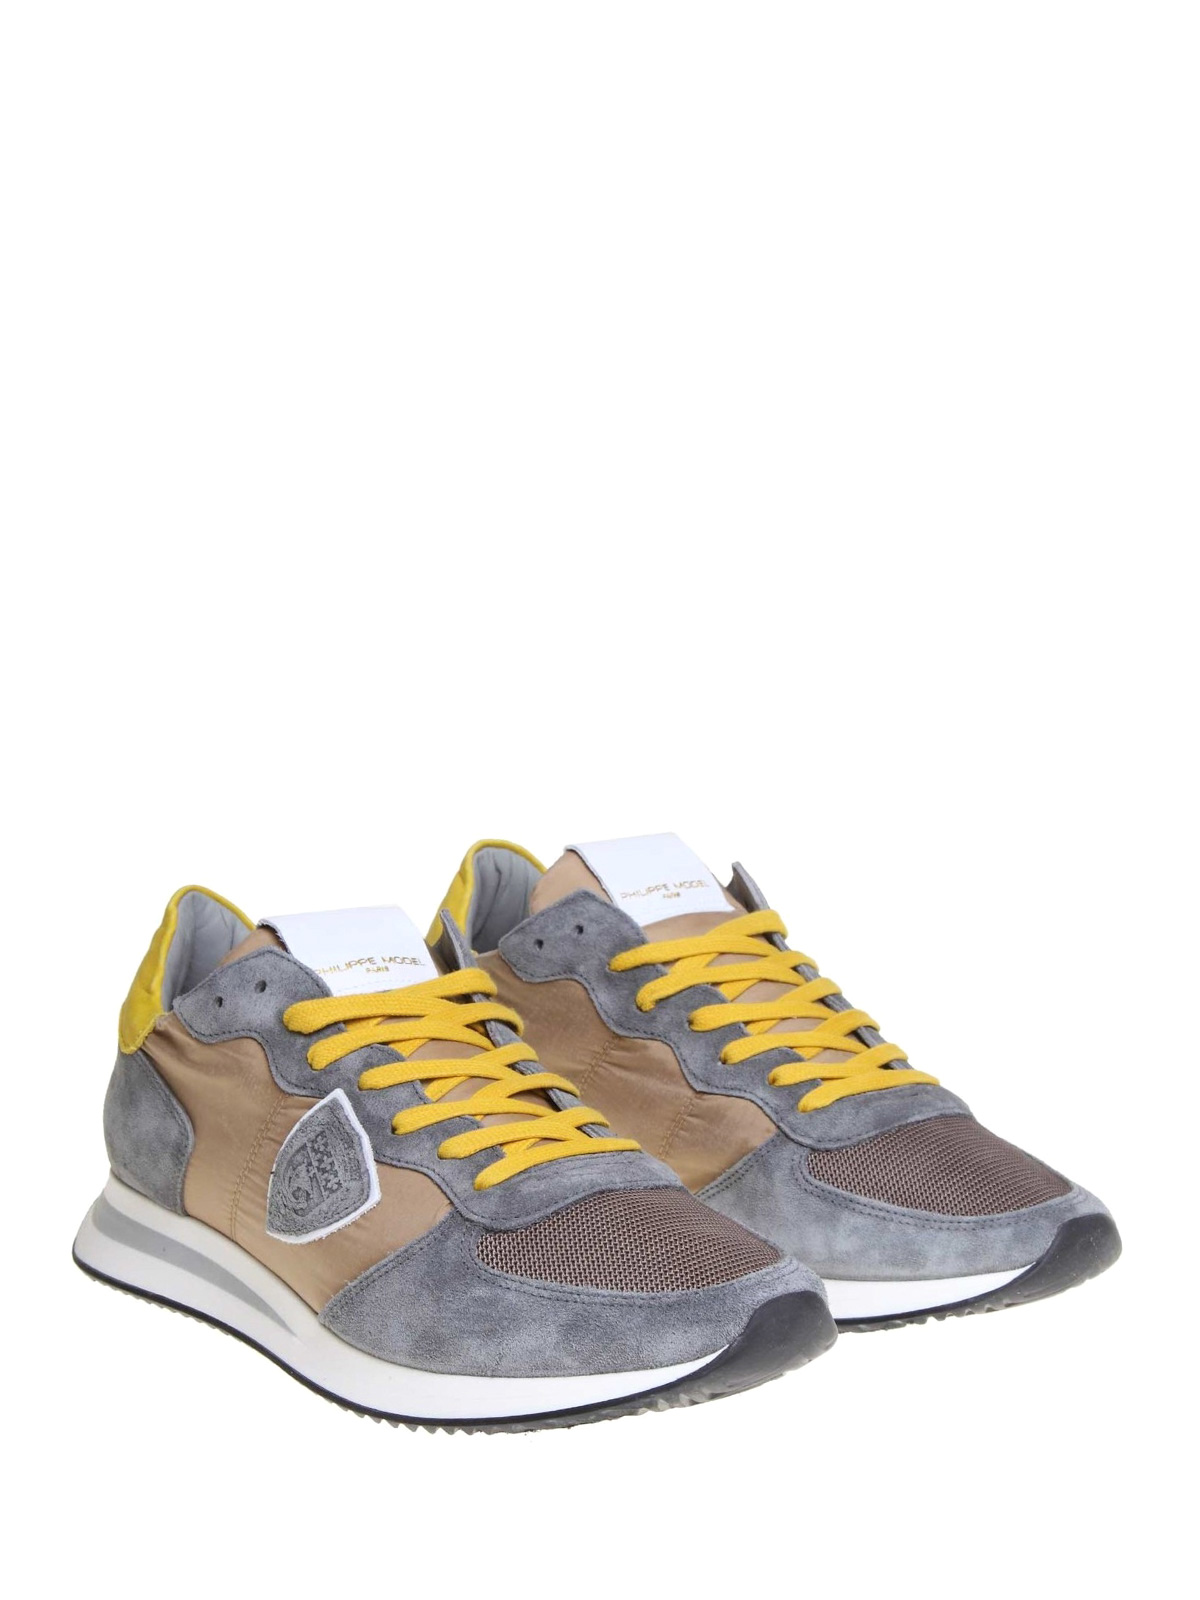 Trainers Philippe Model - Trpx Mondial nylon and suede sneakers - TZLUW005